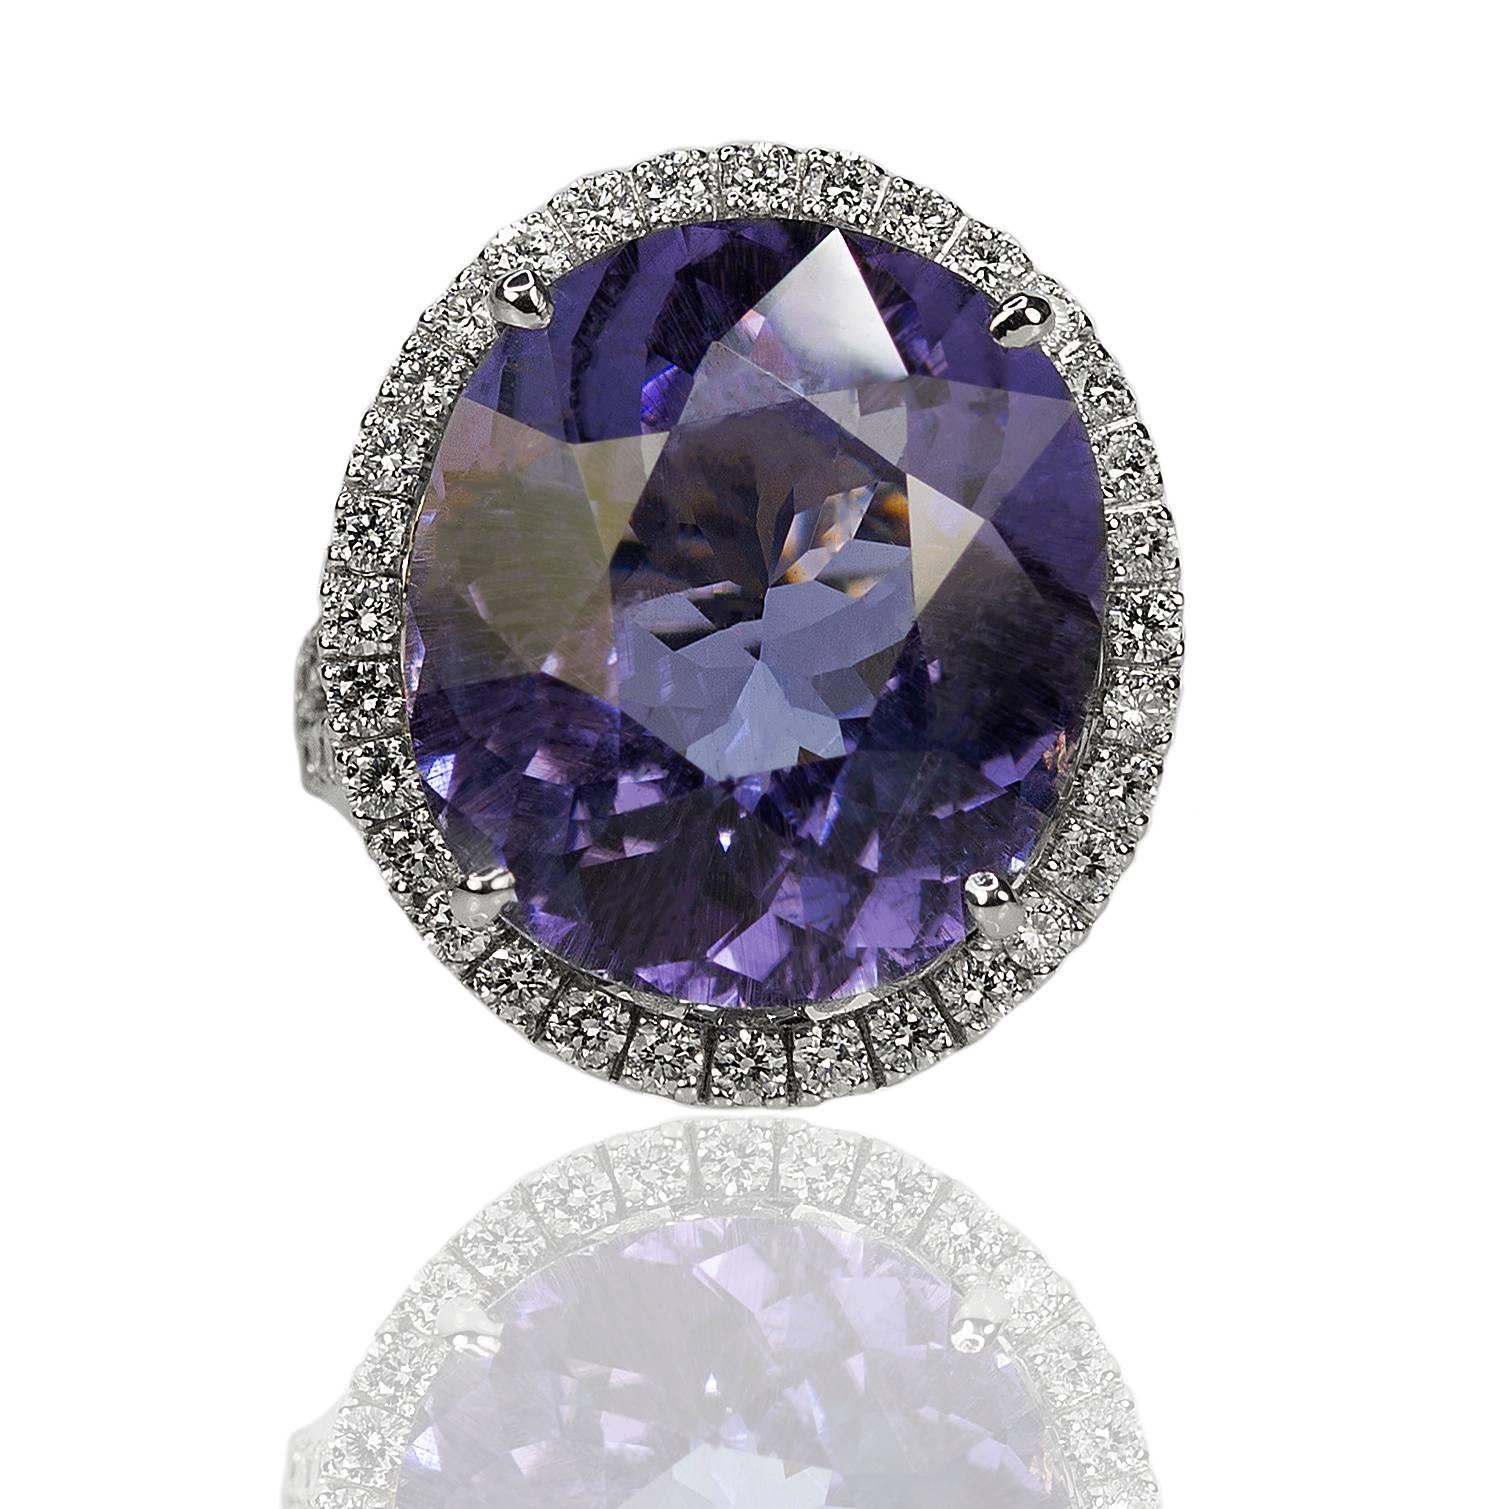 18k White Gold Ring with one AGL certified 17.72 carat Lavender Cuprian ( Paraiba Type ) Tourmaline  and 62 round brilliant diamonds weighing 1.71 carats, 12.62g